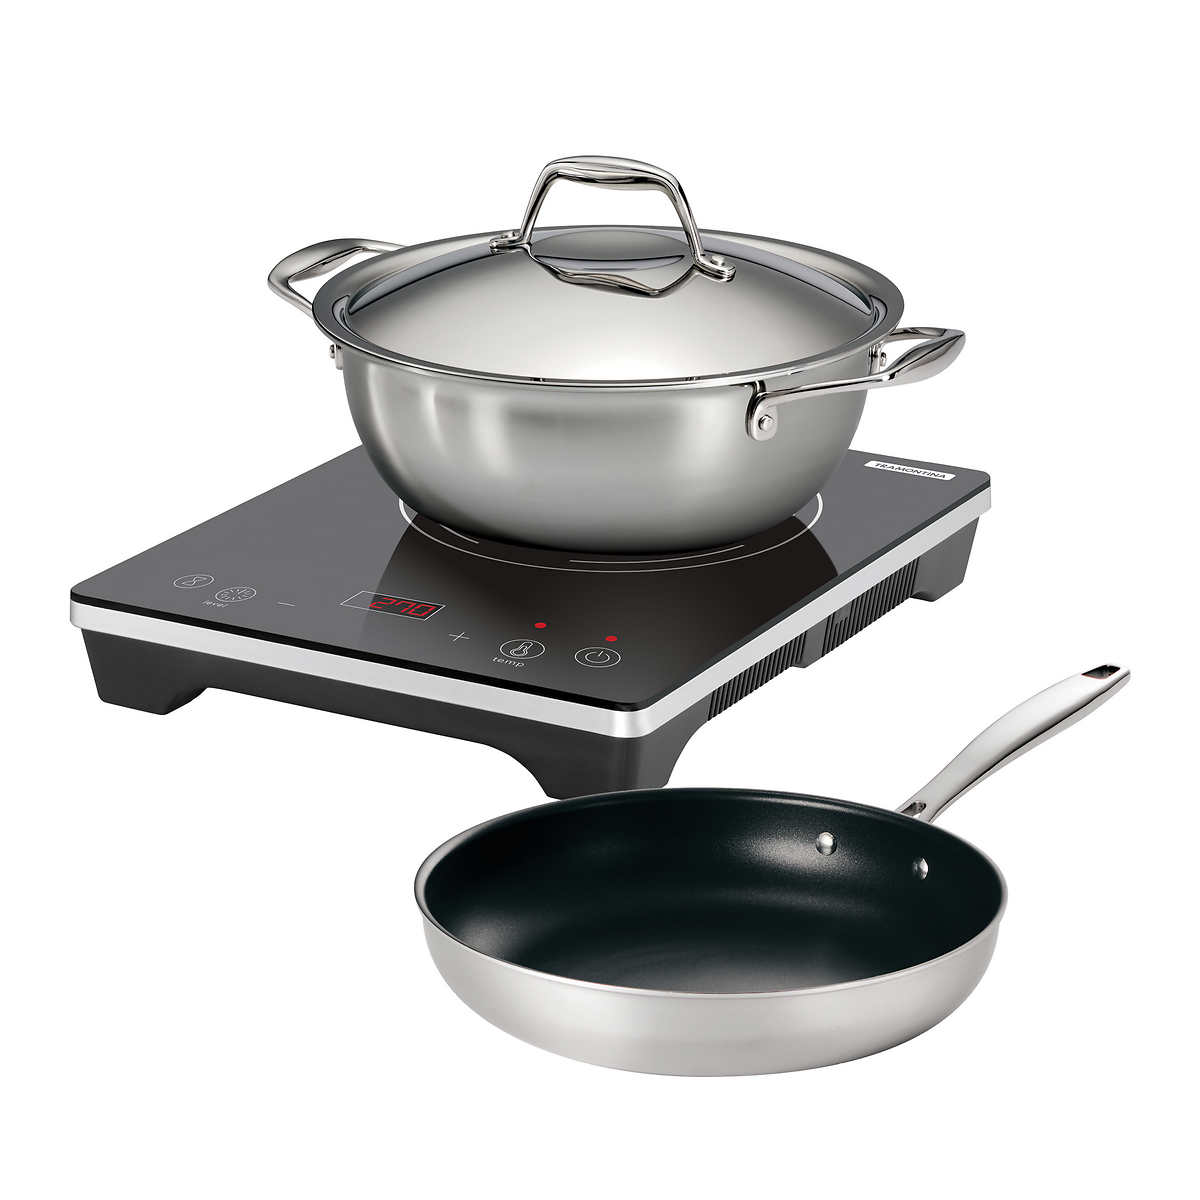 Tramontina 4pc Induction Cooking System | Costco